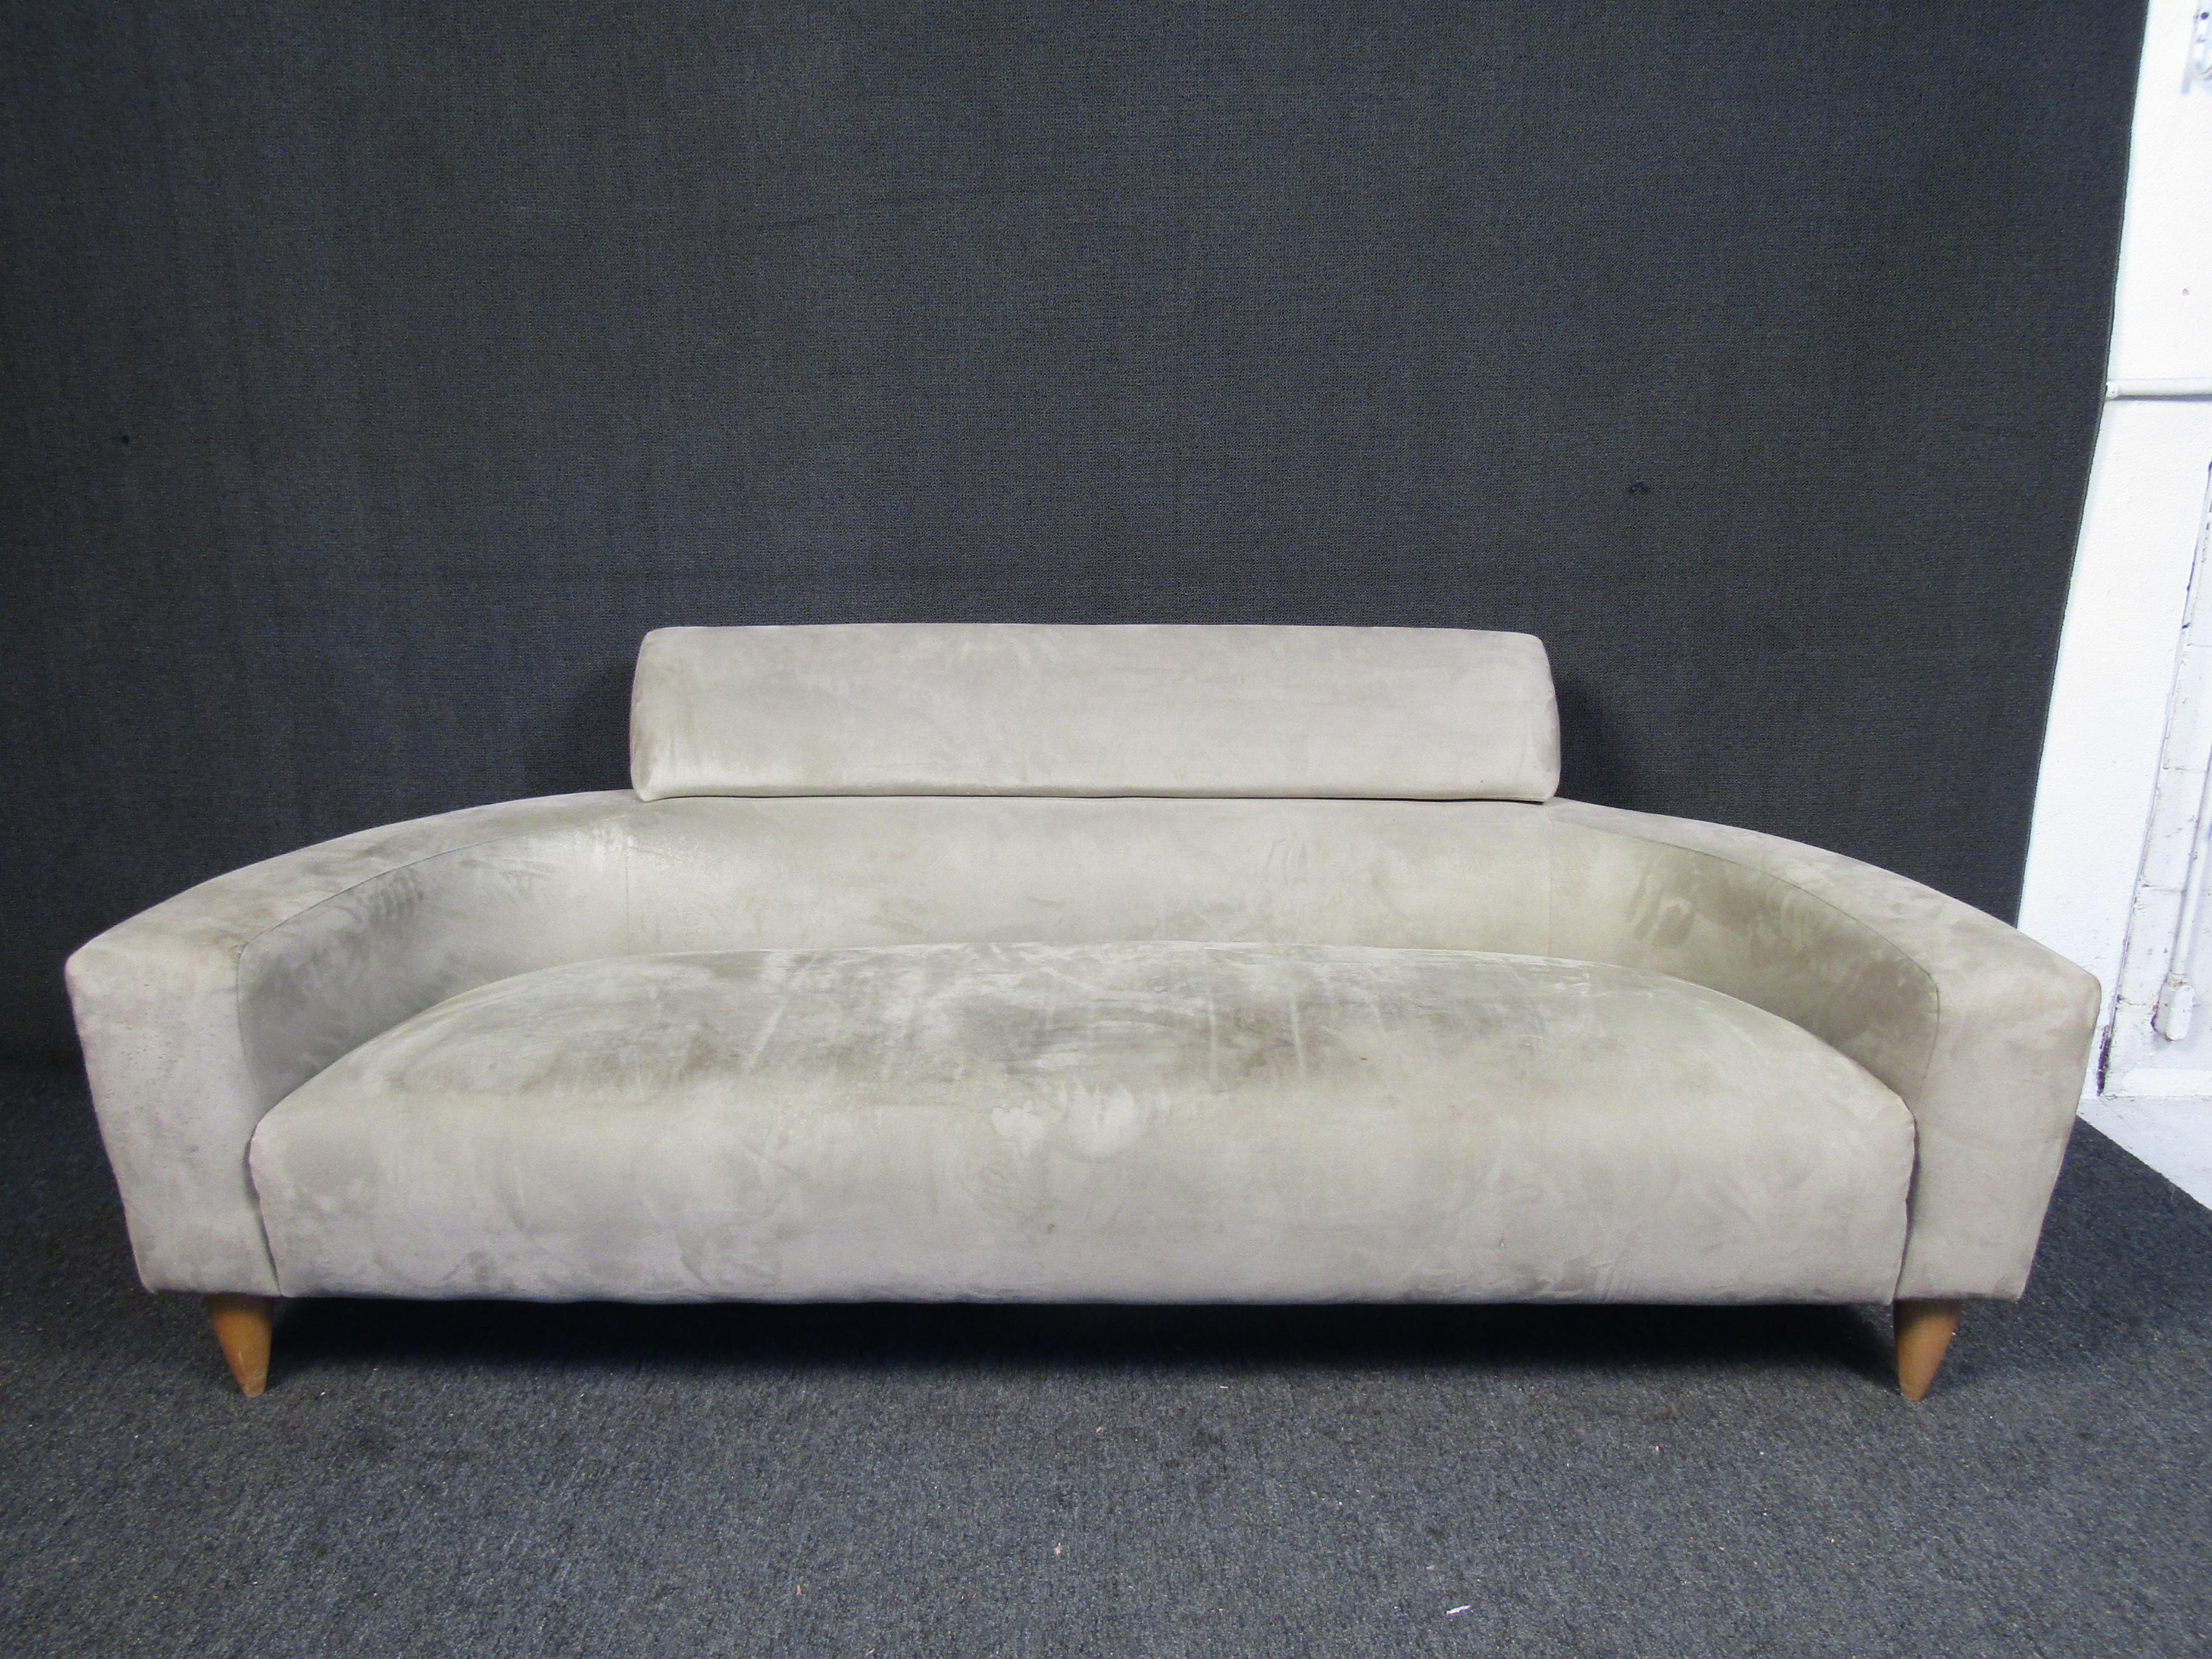 This long and low vintage Mid-Century Modern sofa is fitted with soft bright colored fabric and sleek walnut legs. The modern design is what gives the sofa its distinctive look. Please confirm item location (NJ or NY).